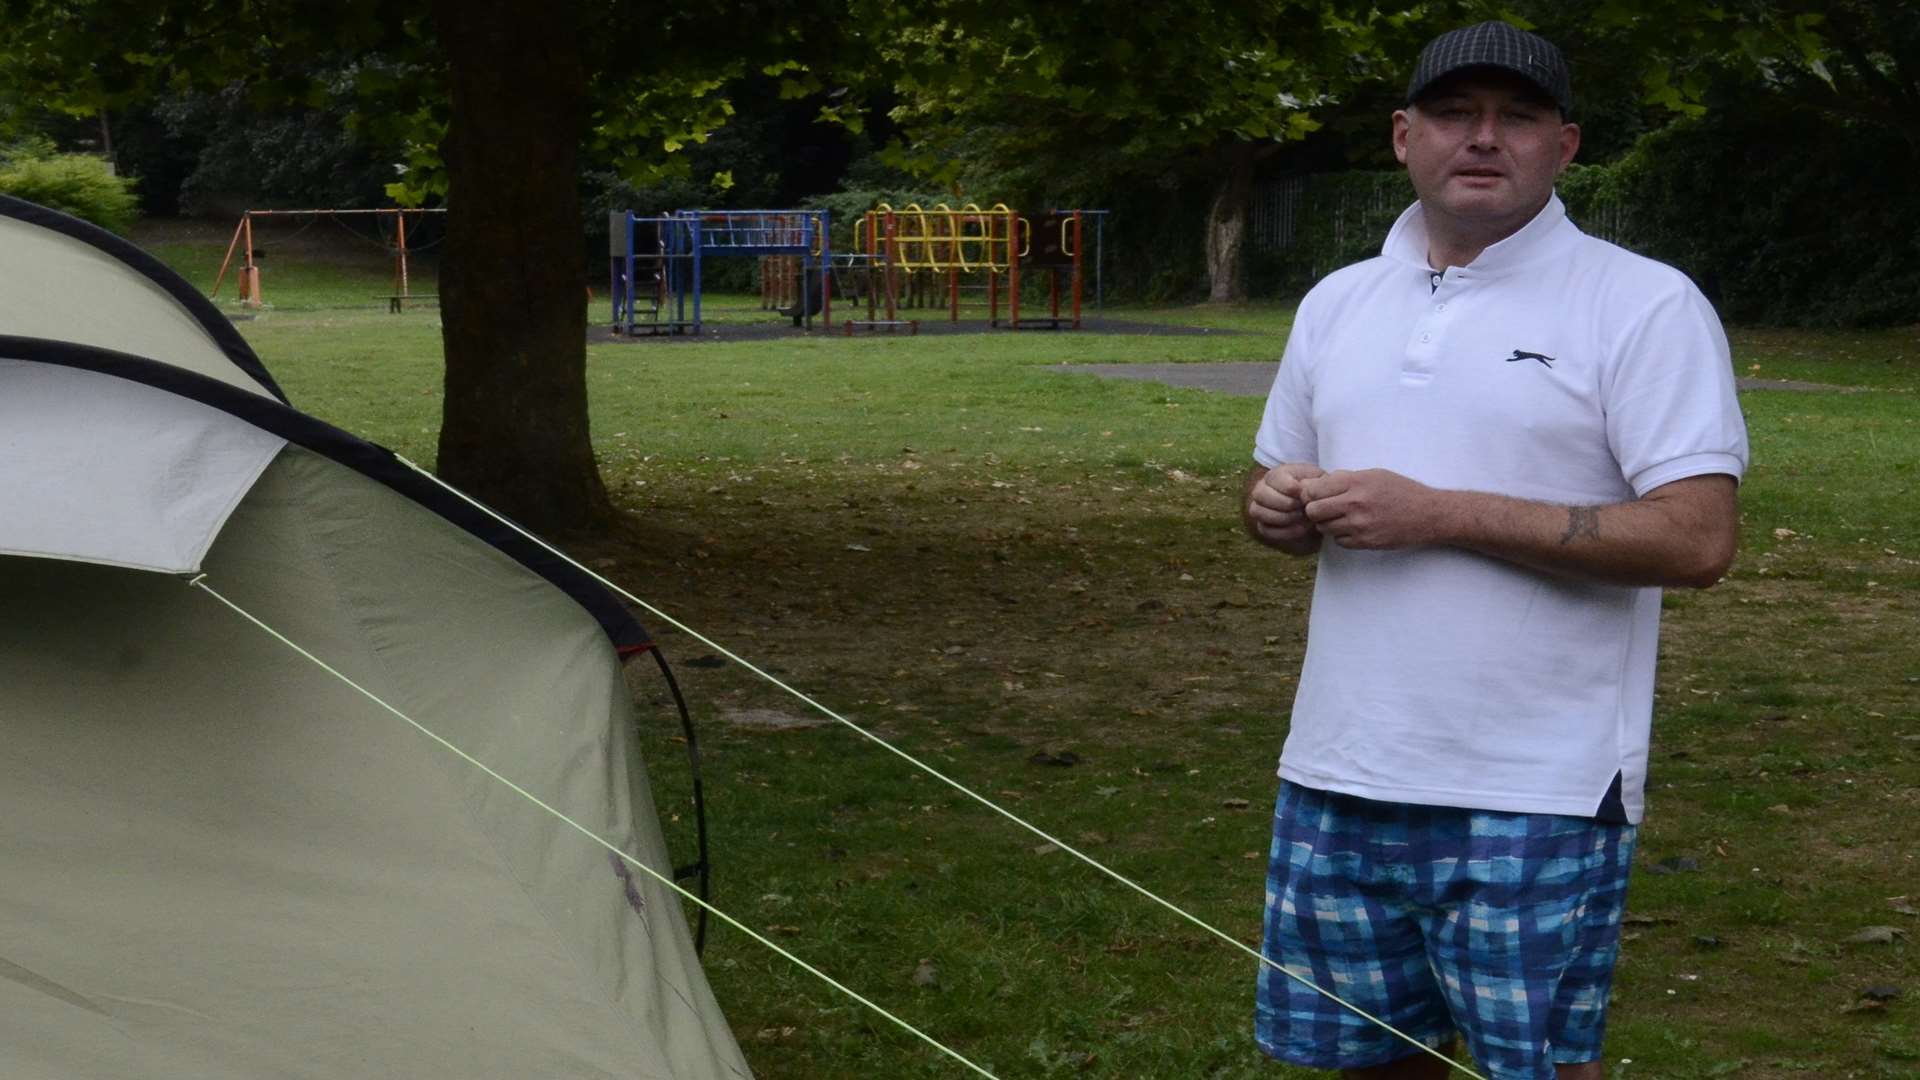 Wayne Myers has been living in a tent in a children's play park for two years.